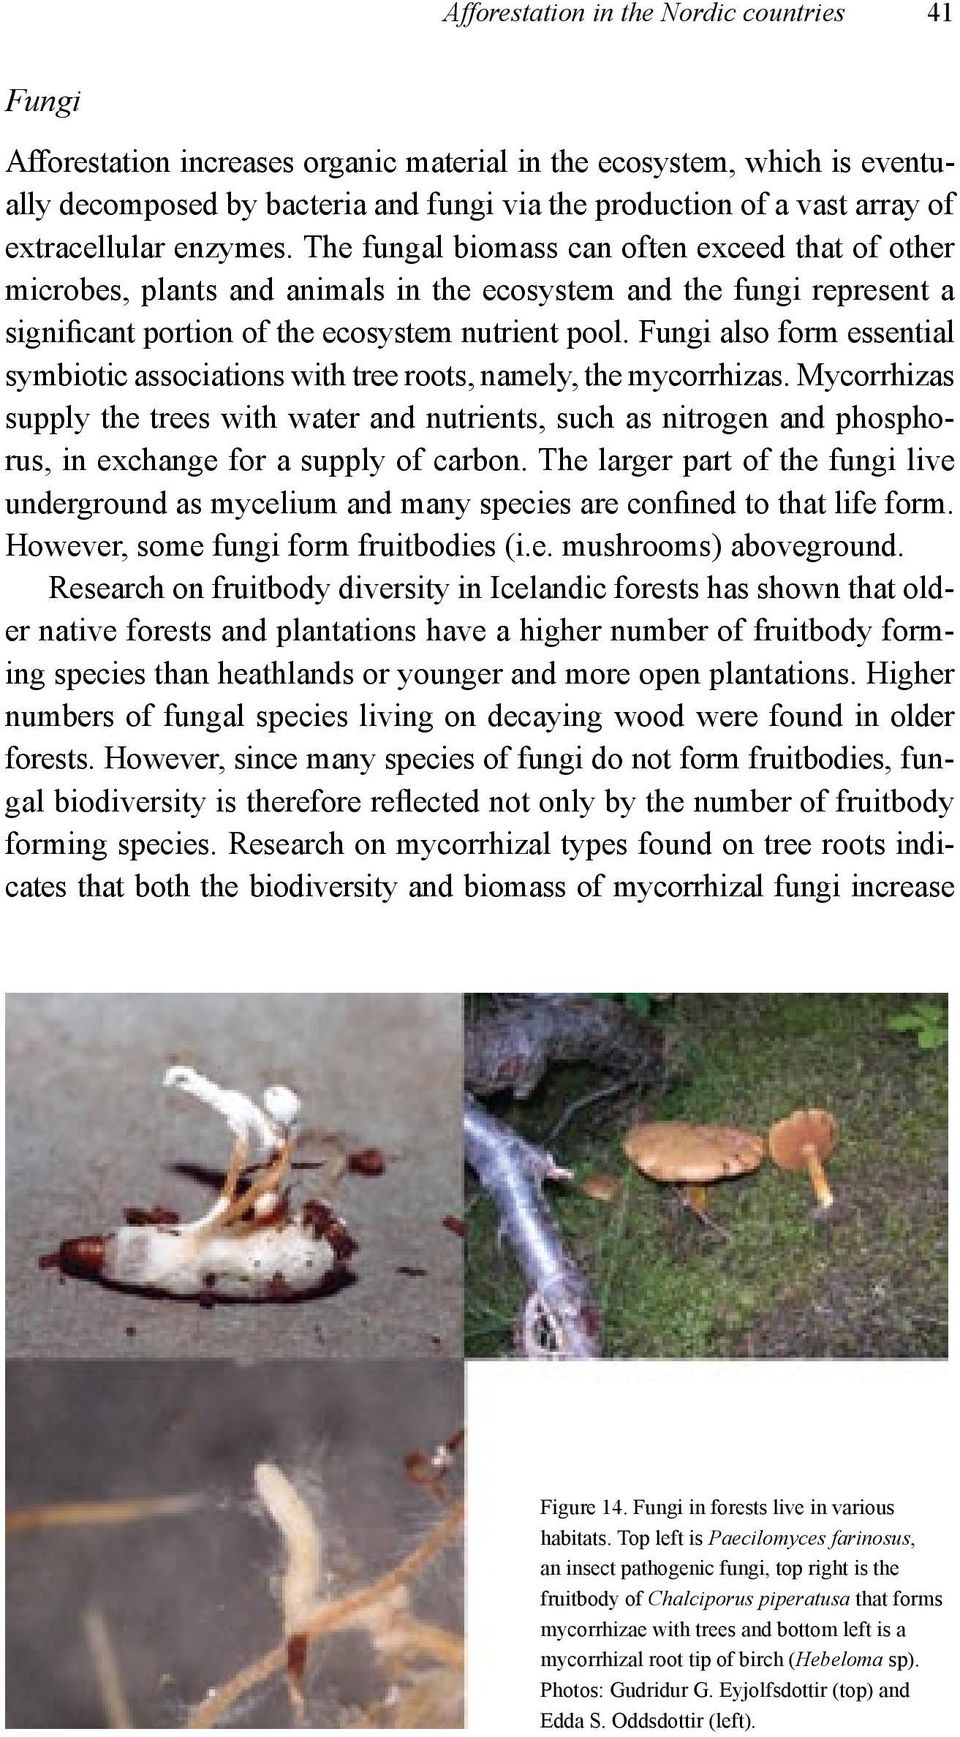 Fungi also form essential symbiotic associations with tree roots, namely, the mycorrhizas.